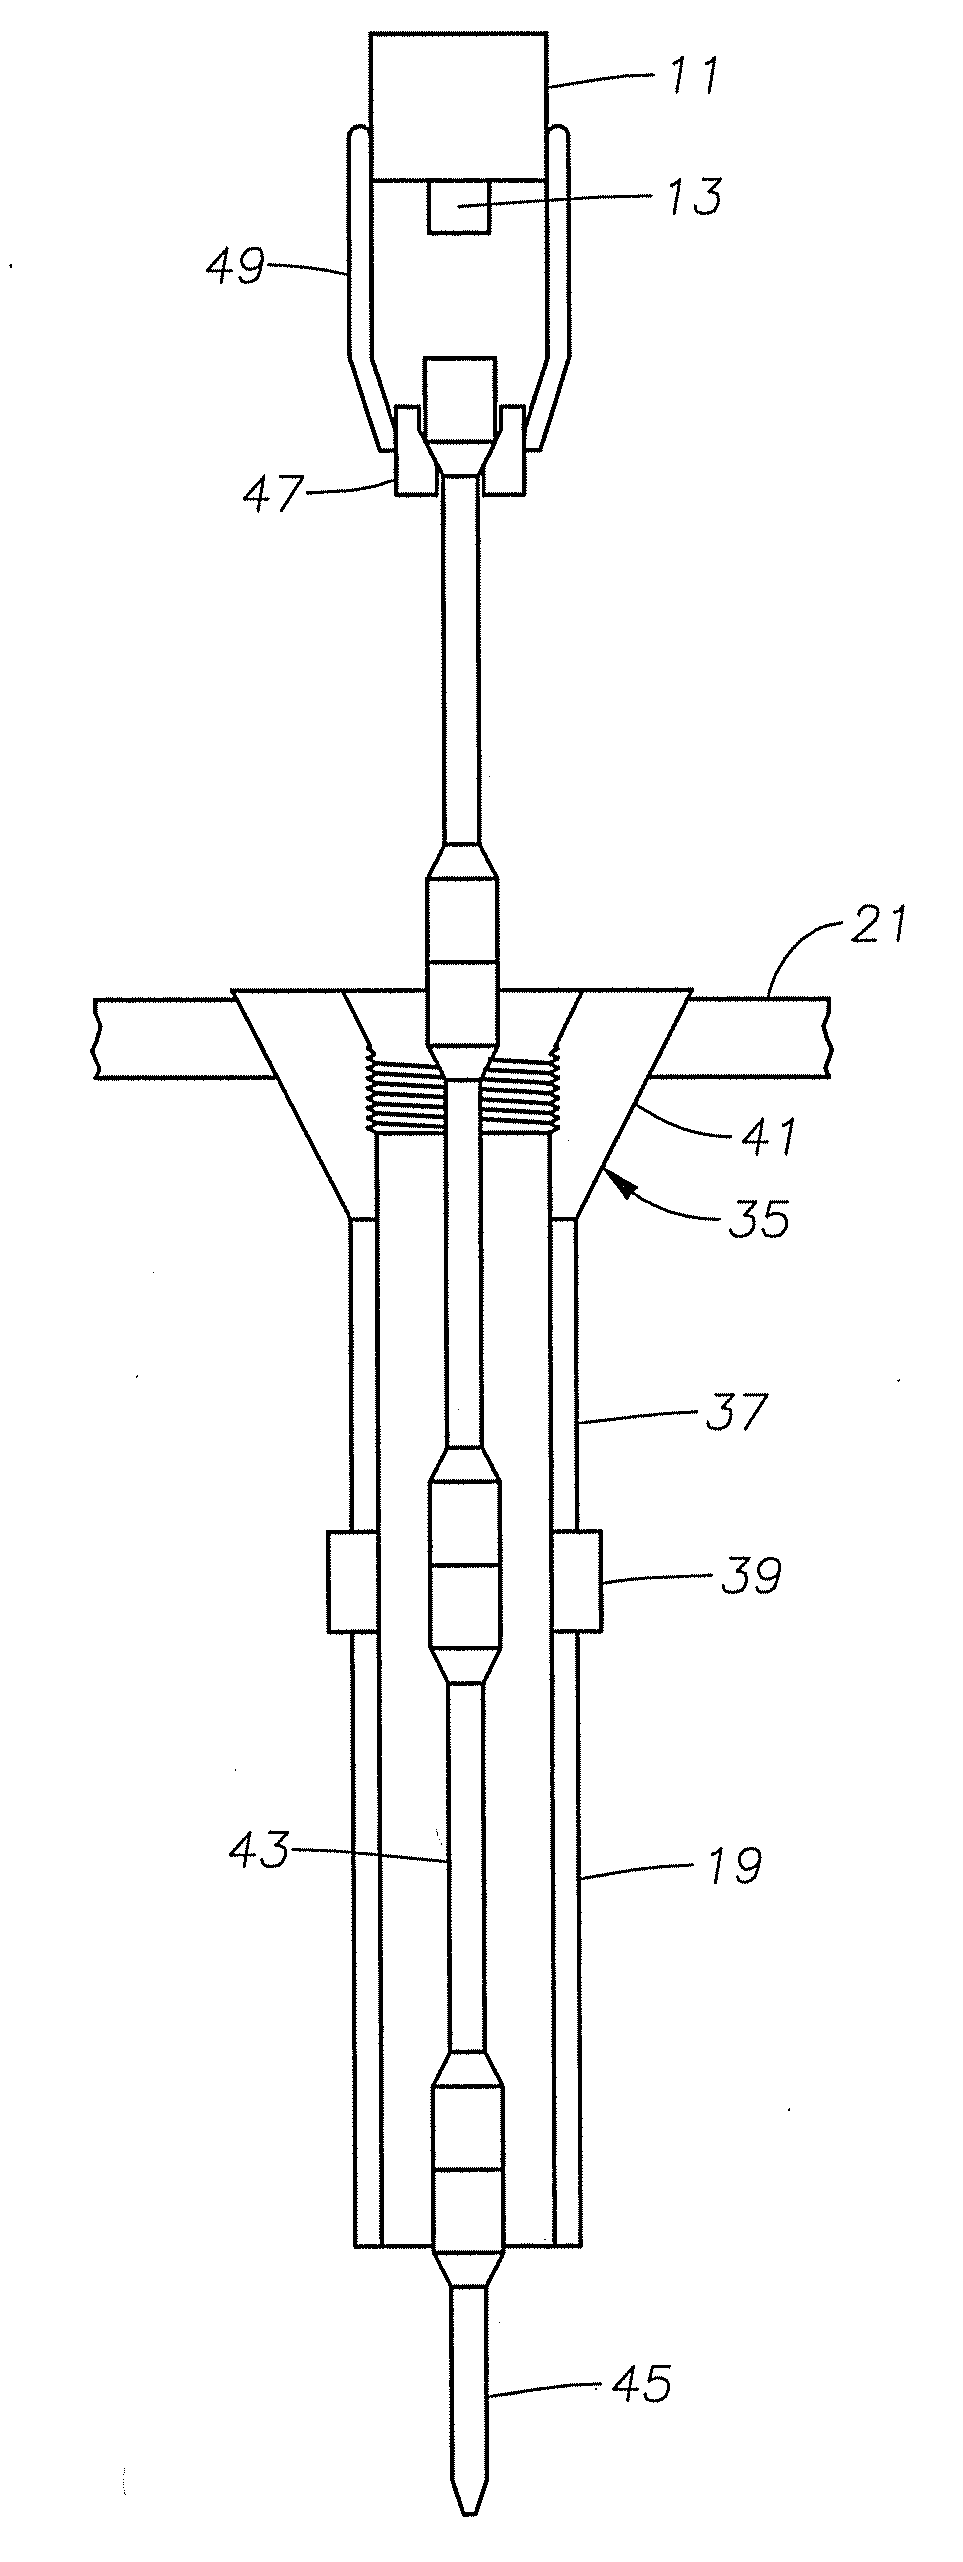 Method of Circulating While Retrieving Bottom Hole Assembly in Casing